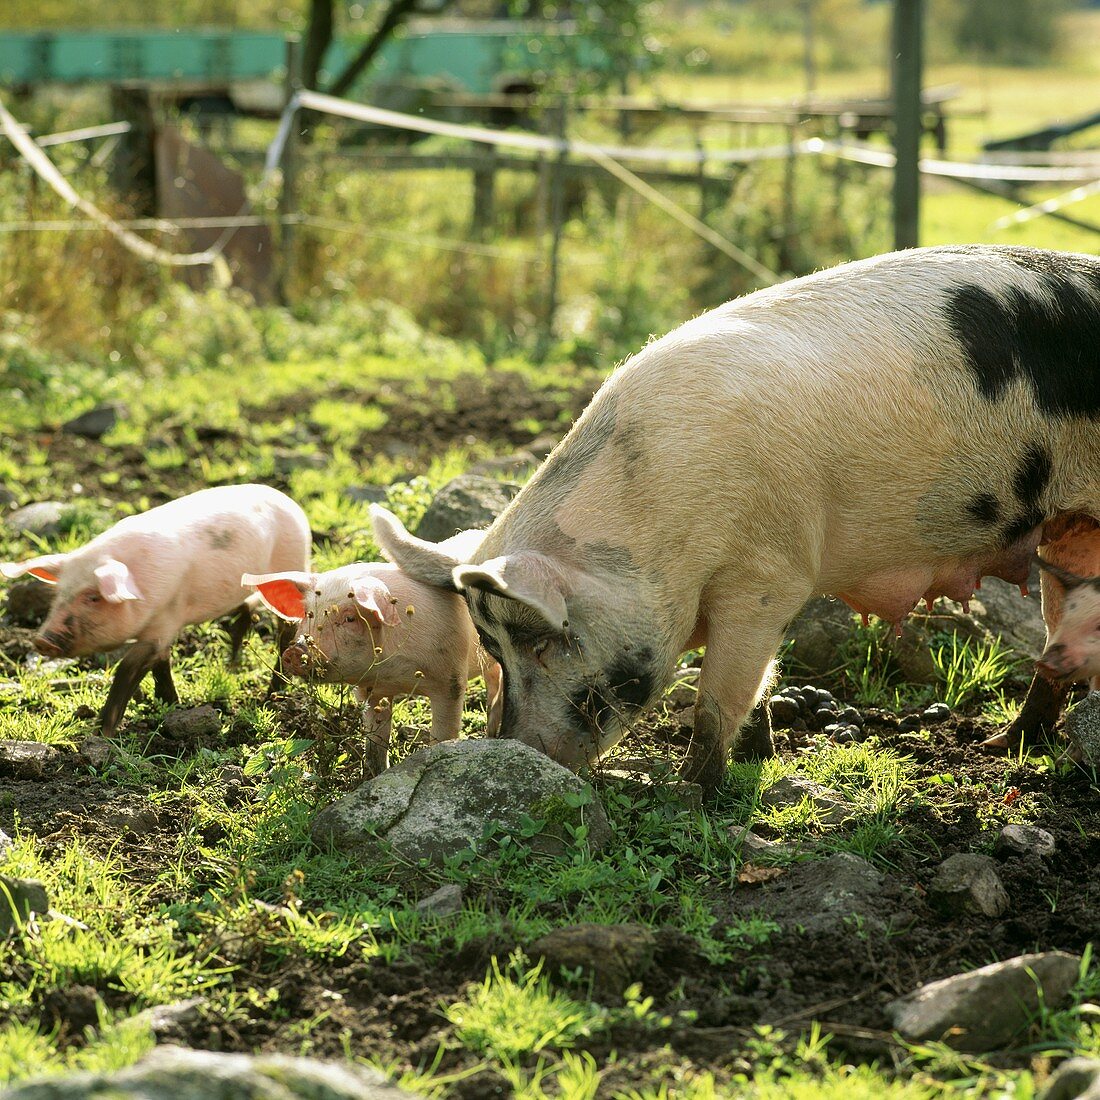 Sow and piglets on a farm in Sweden